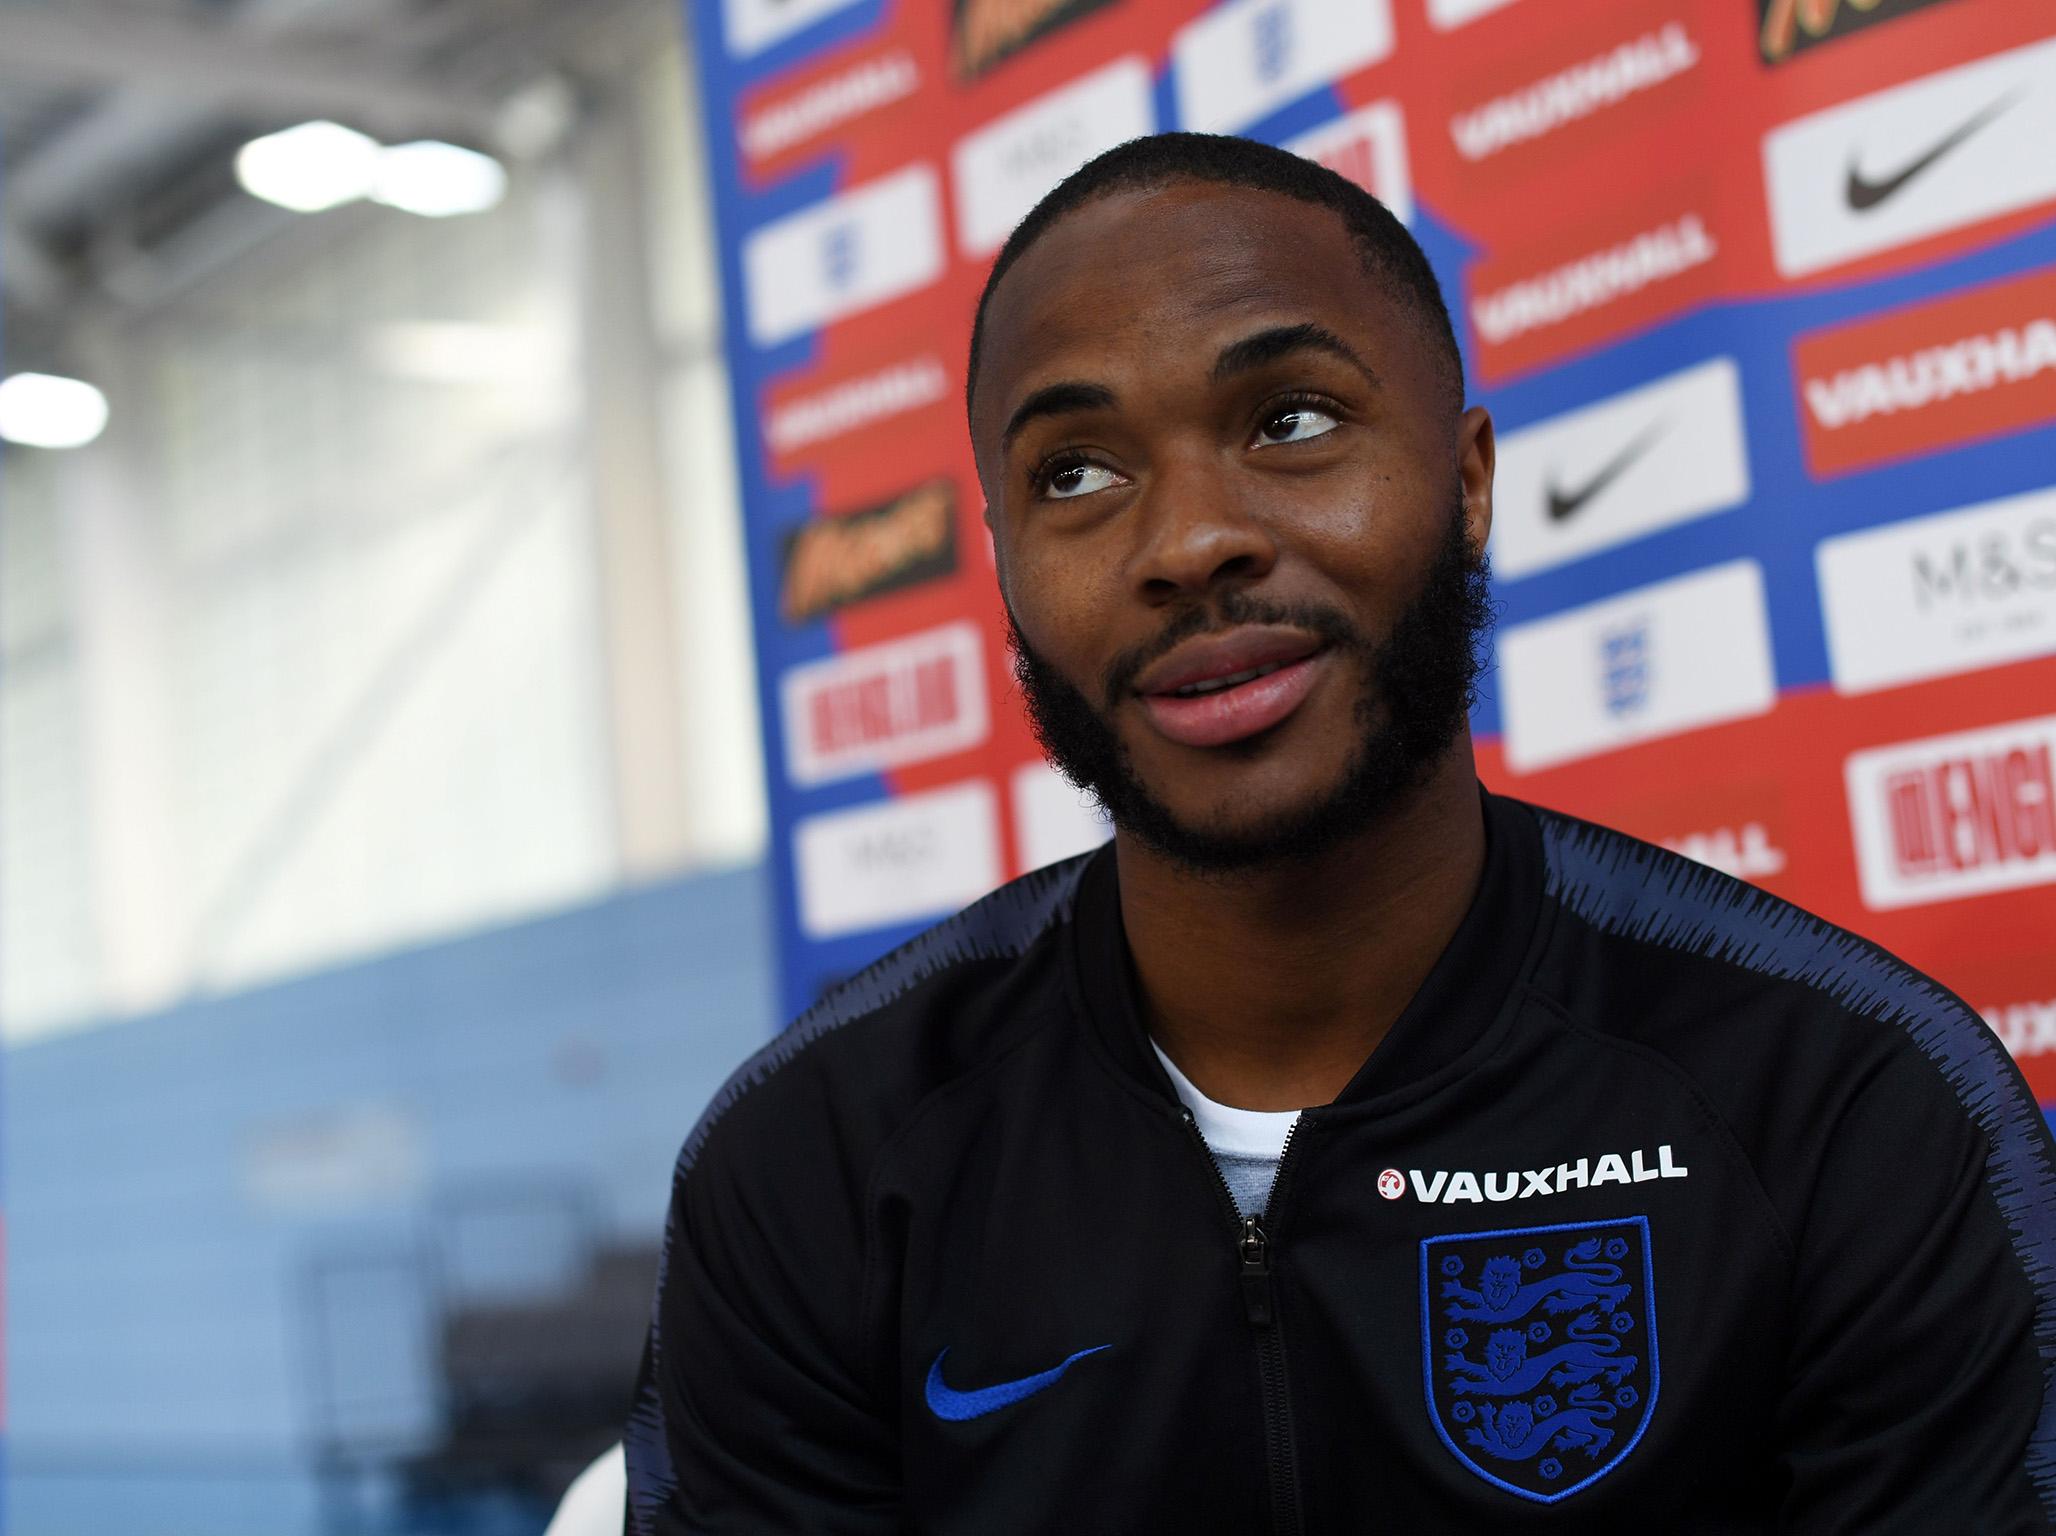 &apos;I&apos;ve got a tattoo of it on my arm!&apos;: Raheem Sterling on media perception, World Cup expectation and being No 10